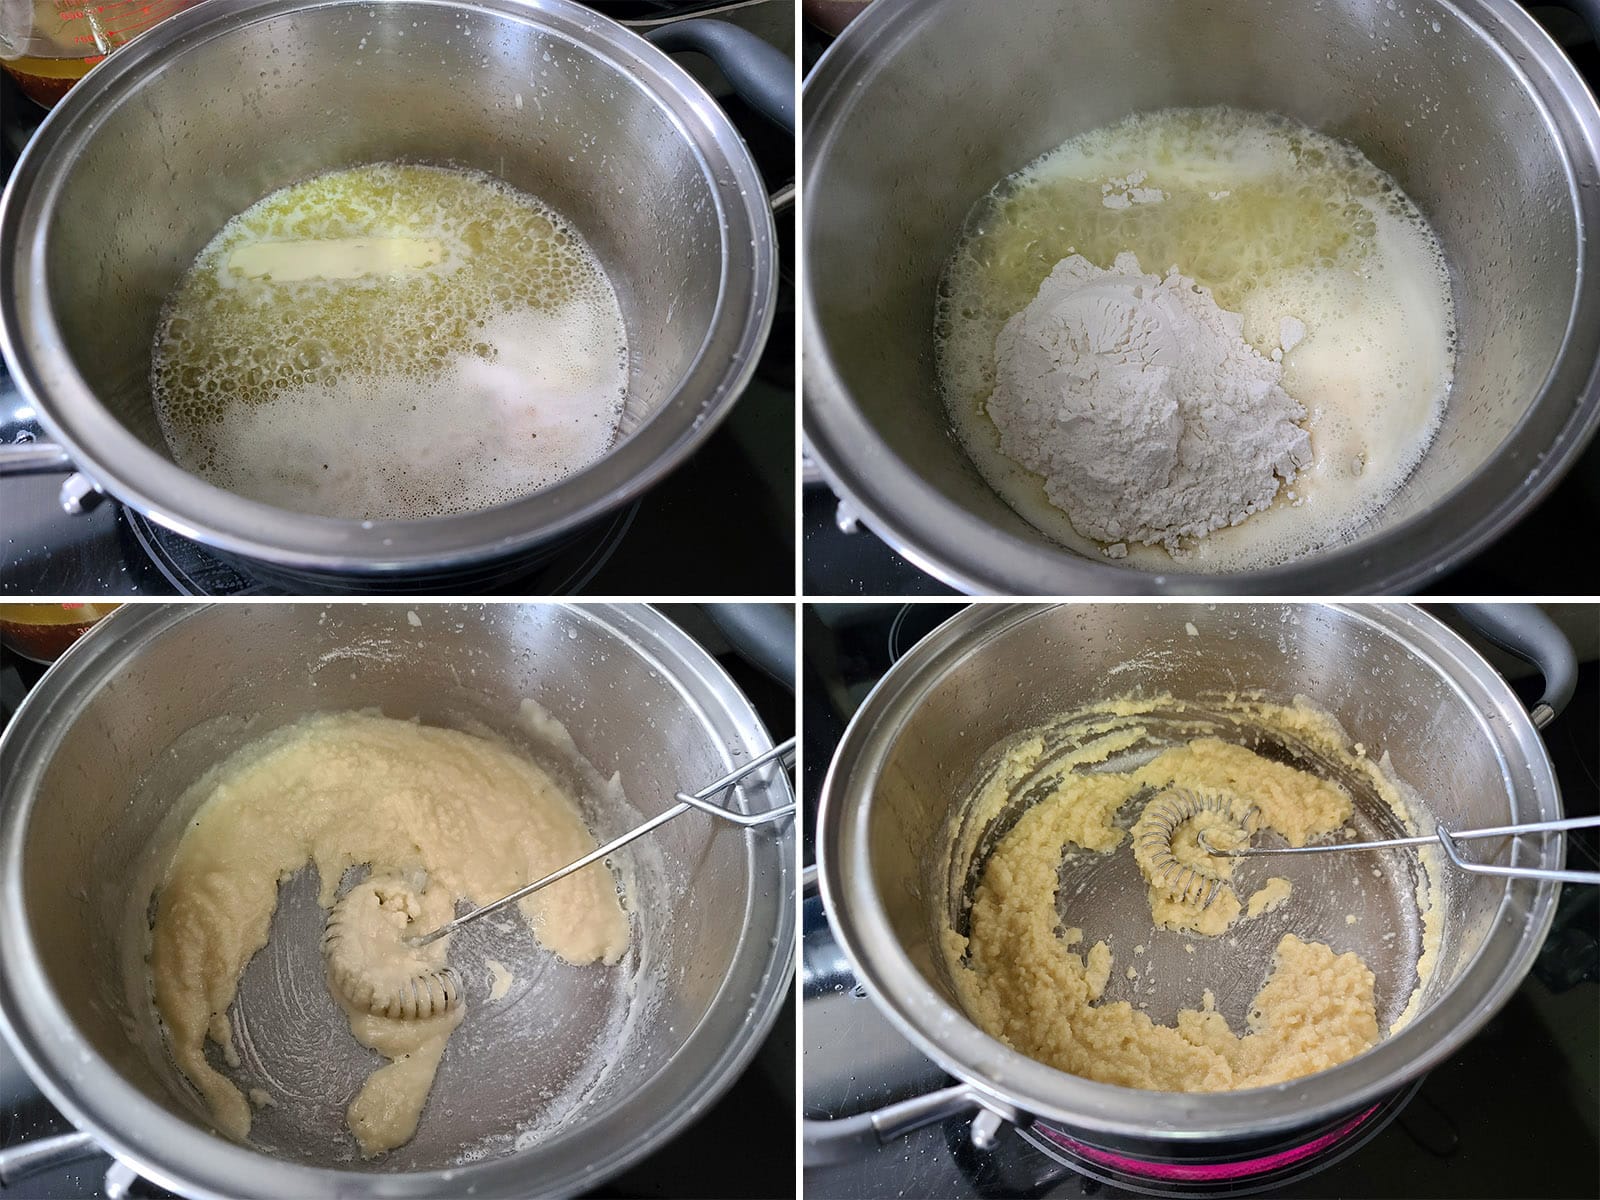 A 4 part image showing the butter being melted in a small pot, flour added, and the flour starting to brown.